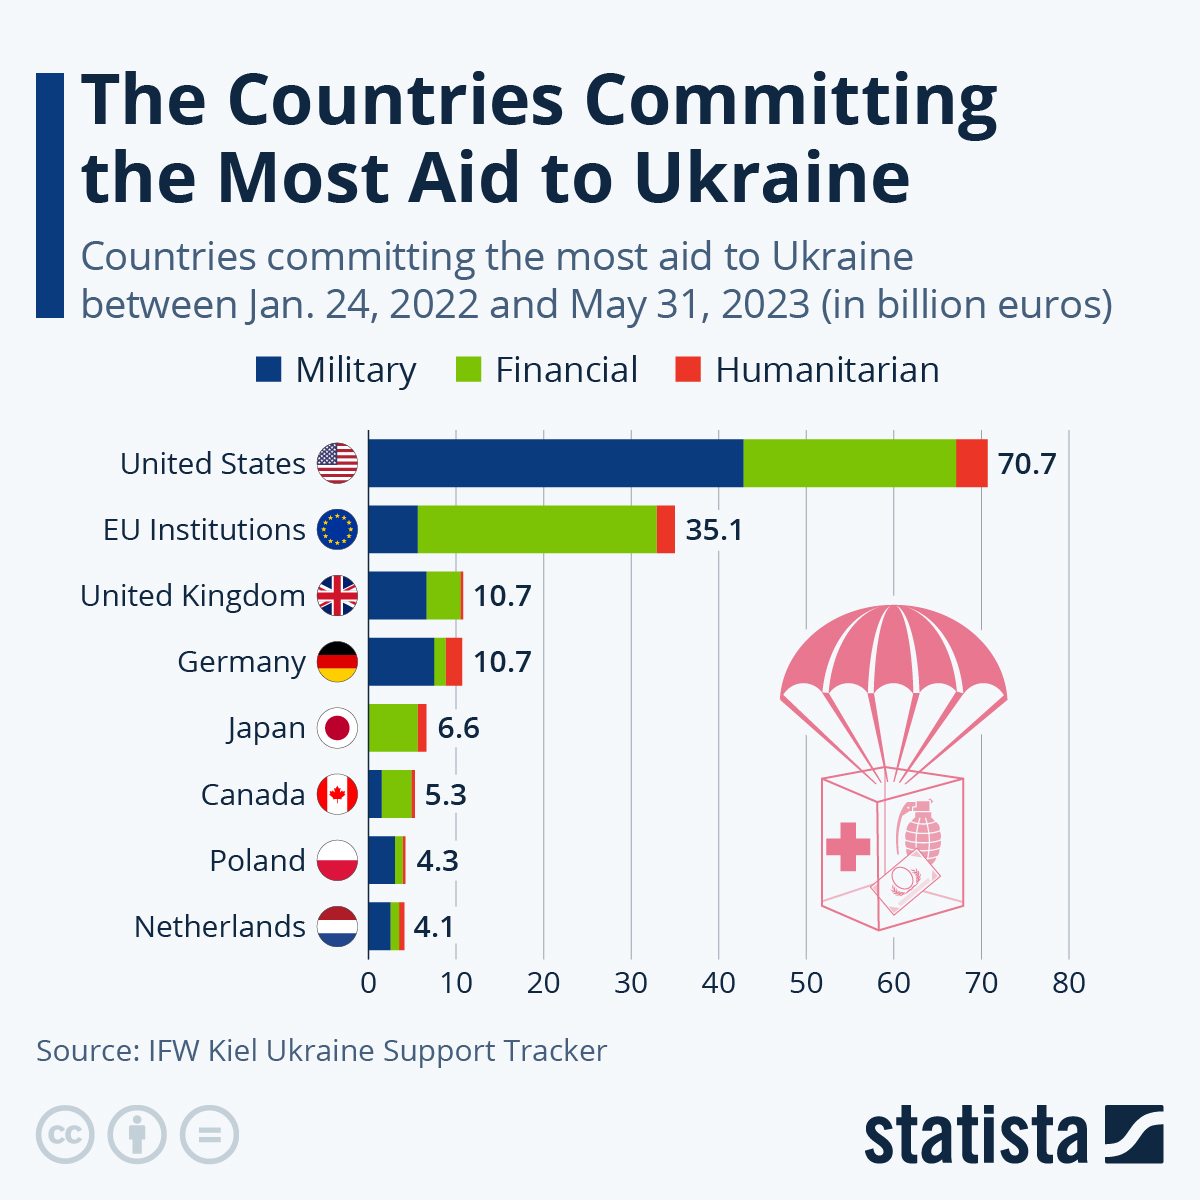 The United States has pledged the largest financial support to Ukraine so far: €71 billion in military, financial and humanitarian aid since the beginning of 2022.